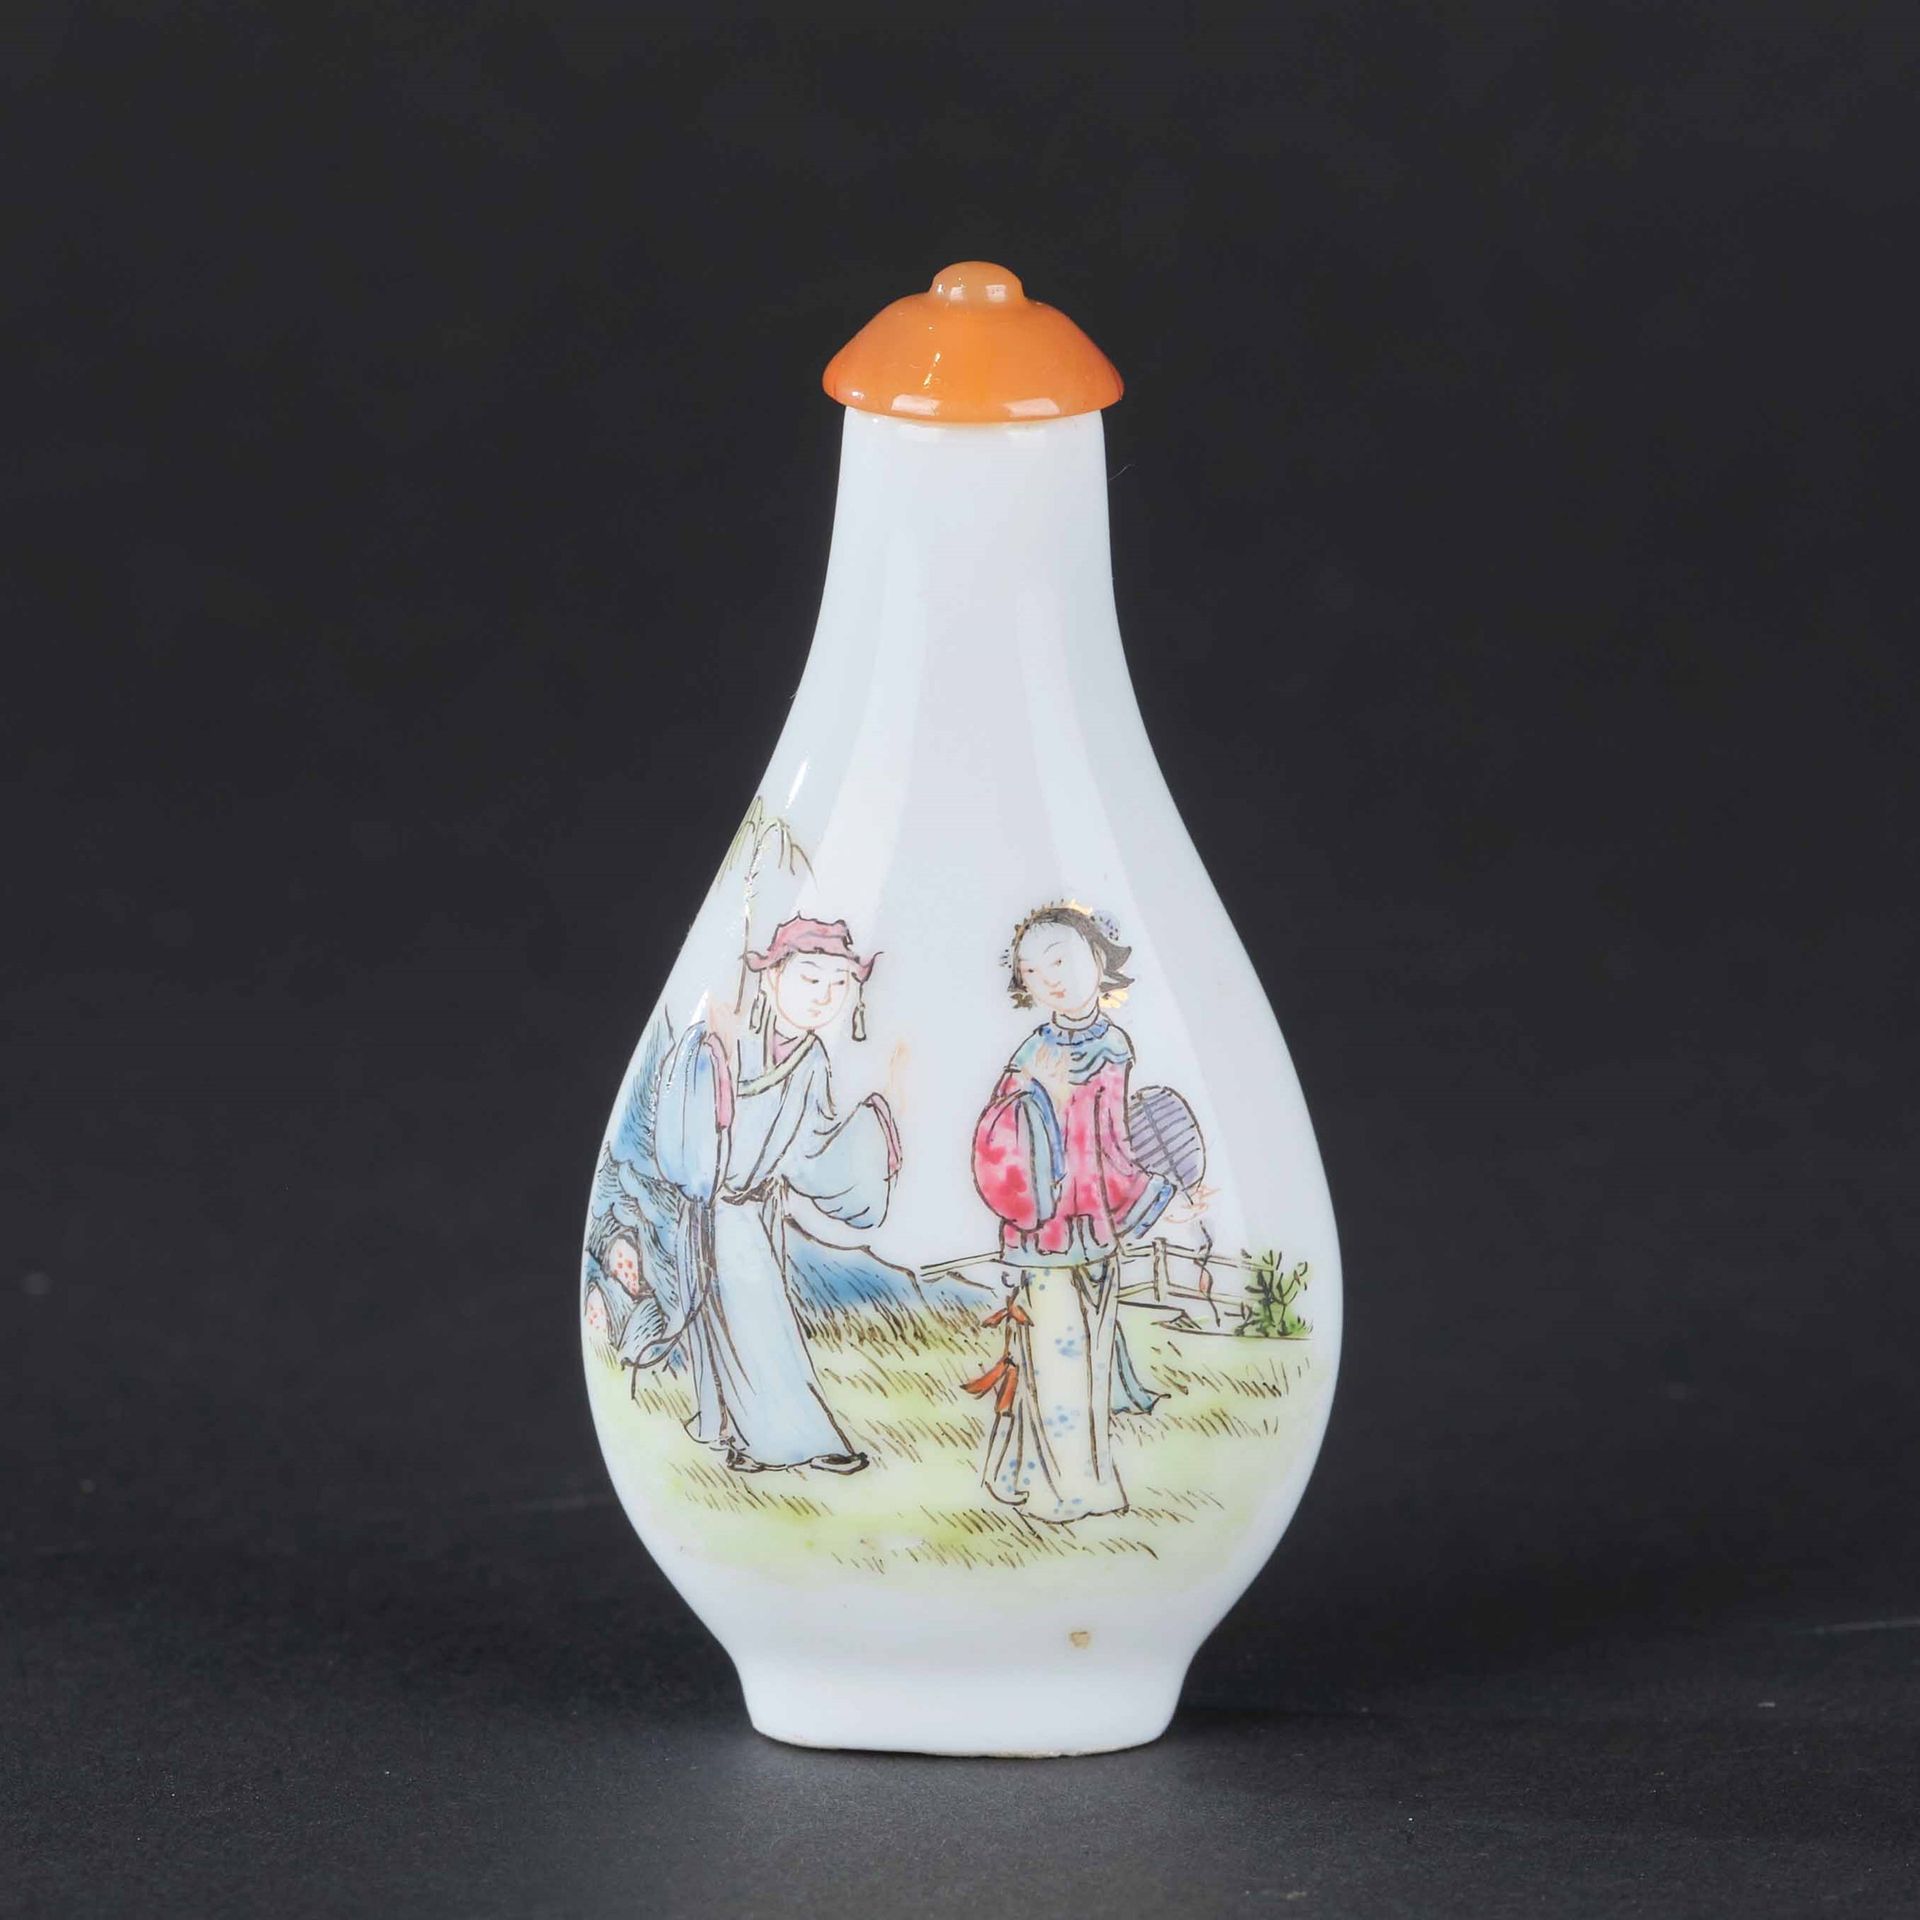 A porcelain snuff bottle, China, Qing Dynasty Daoguang period (1821-1850). H 8cm